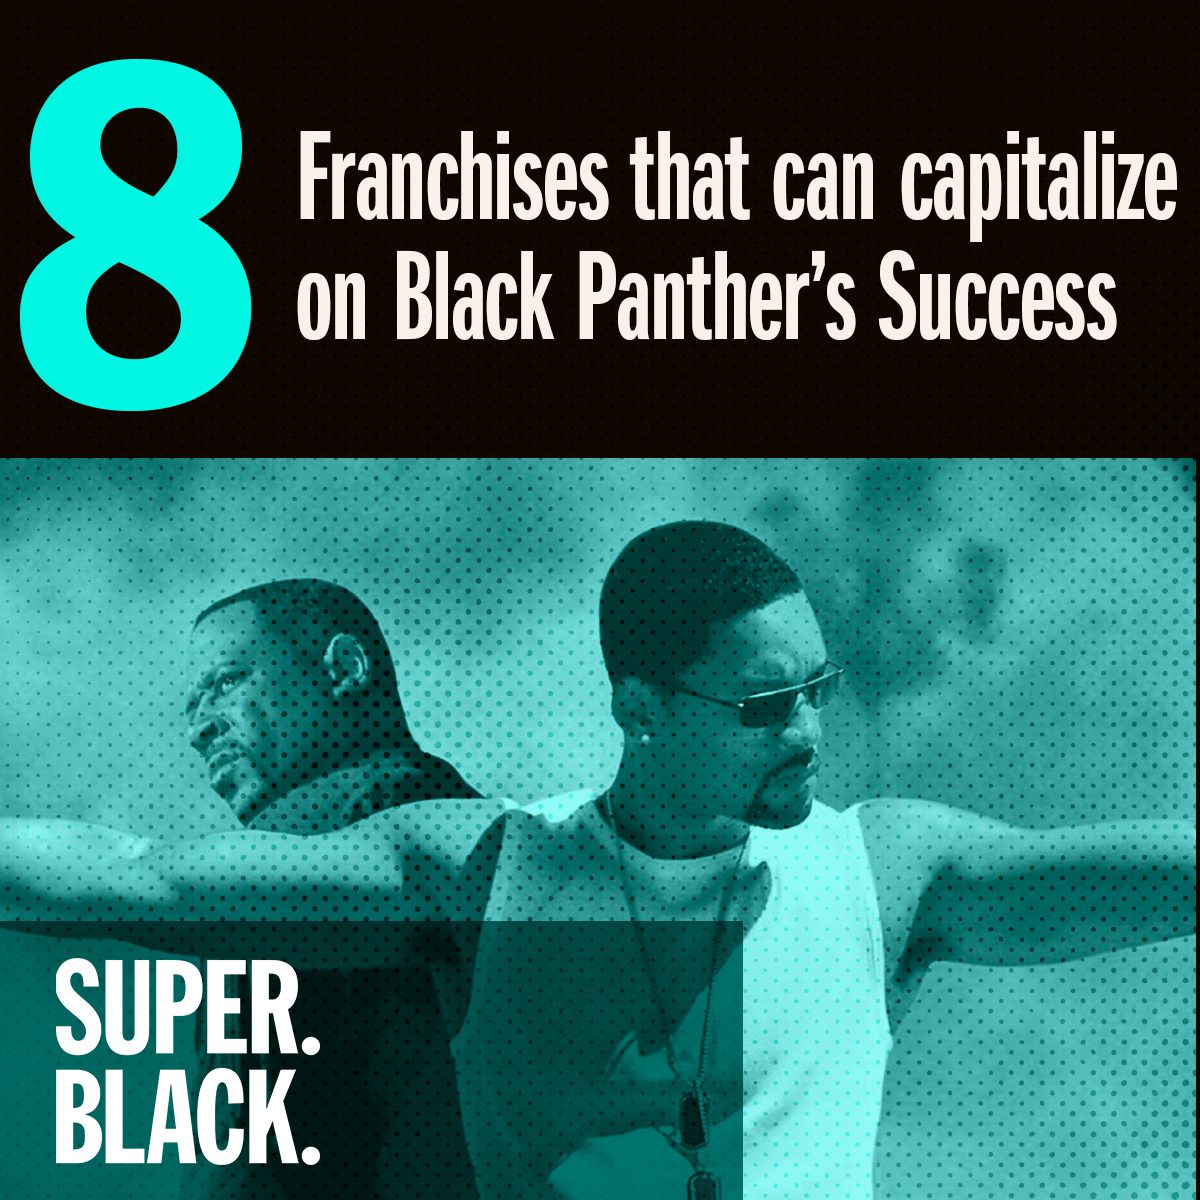 8 Franchises That Can Capitalize on Black Panther's Success - Super. Black.